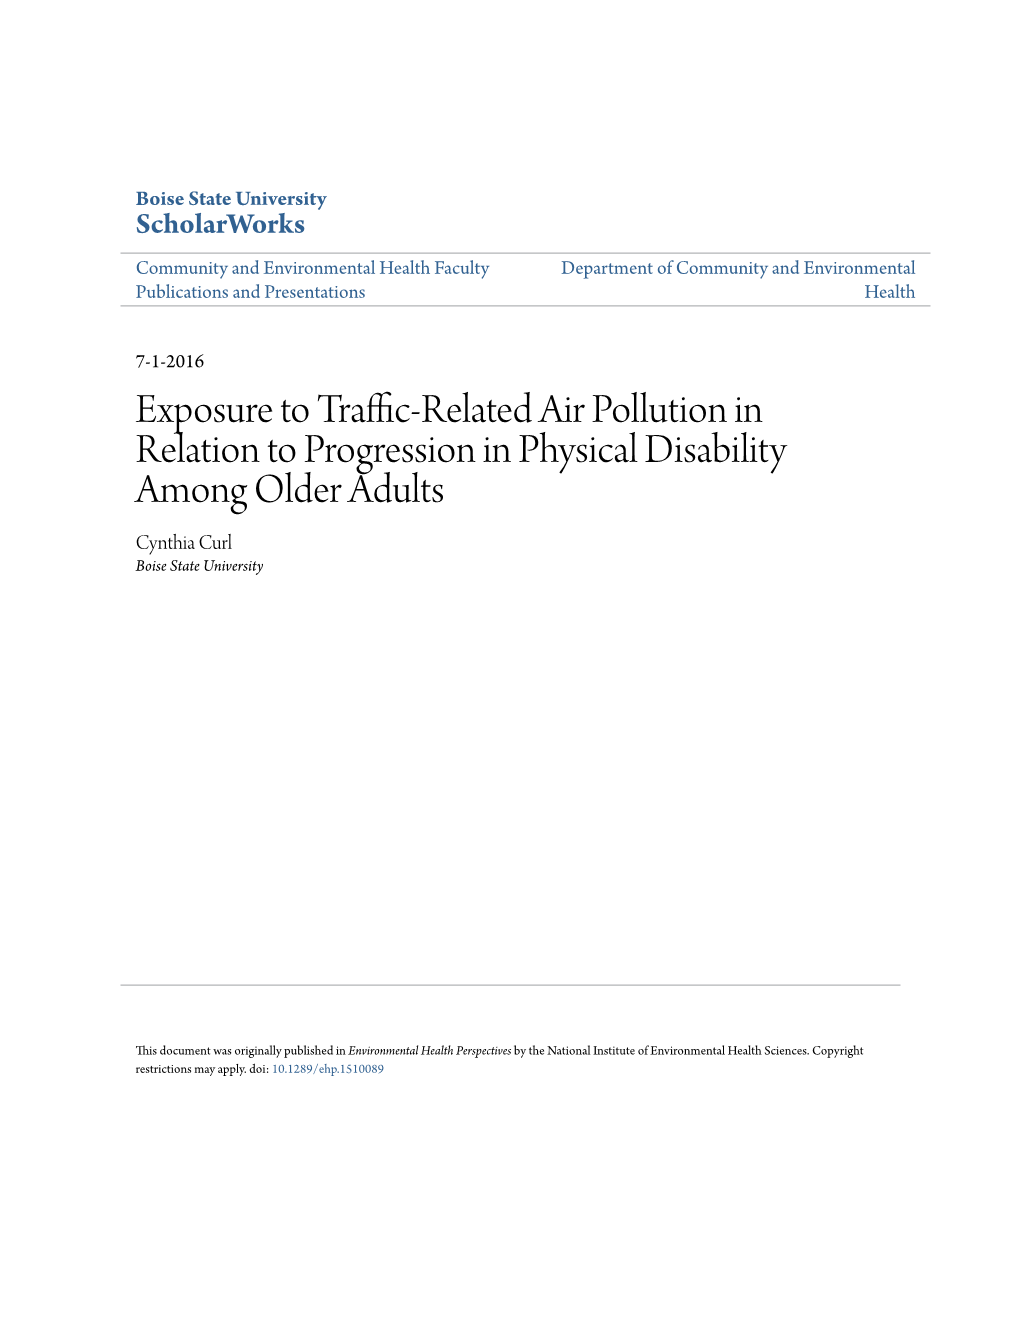 Exposure to Traffic-Related Air Pollution in Relation to Progression in Physical Disability Among Older Adults Cynthia Curl Boise State University